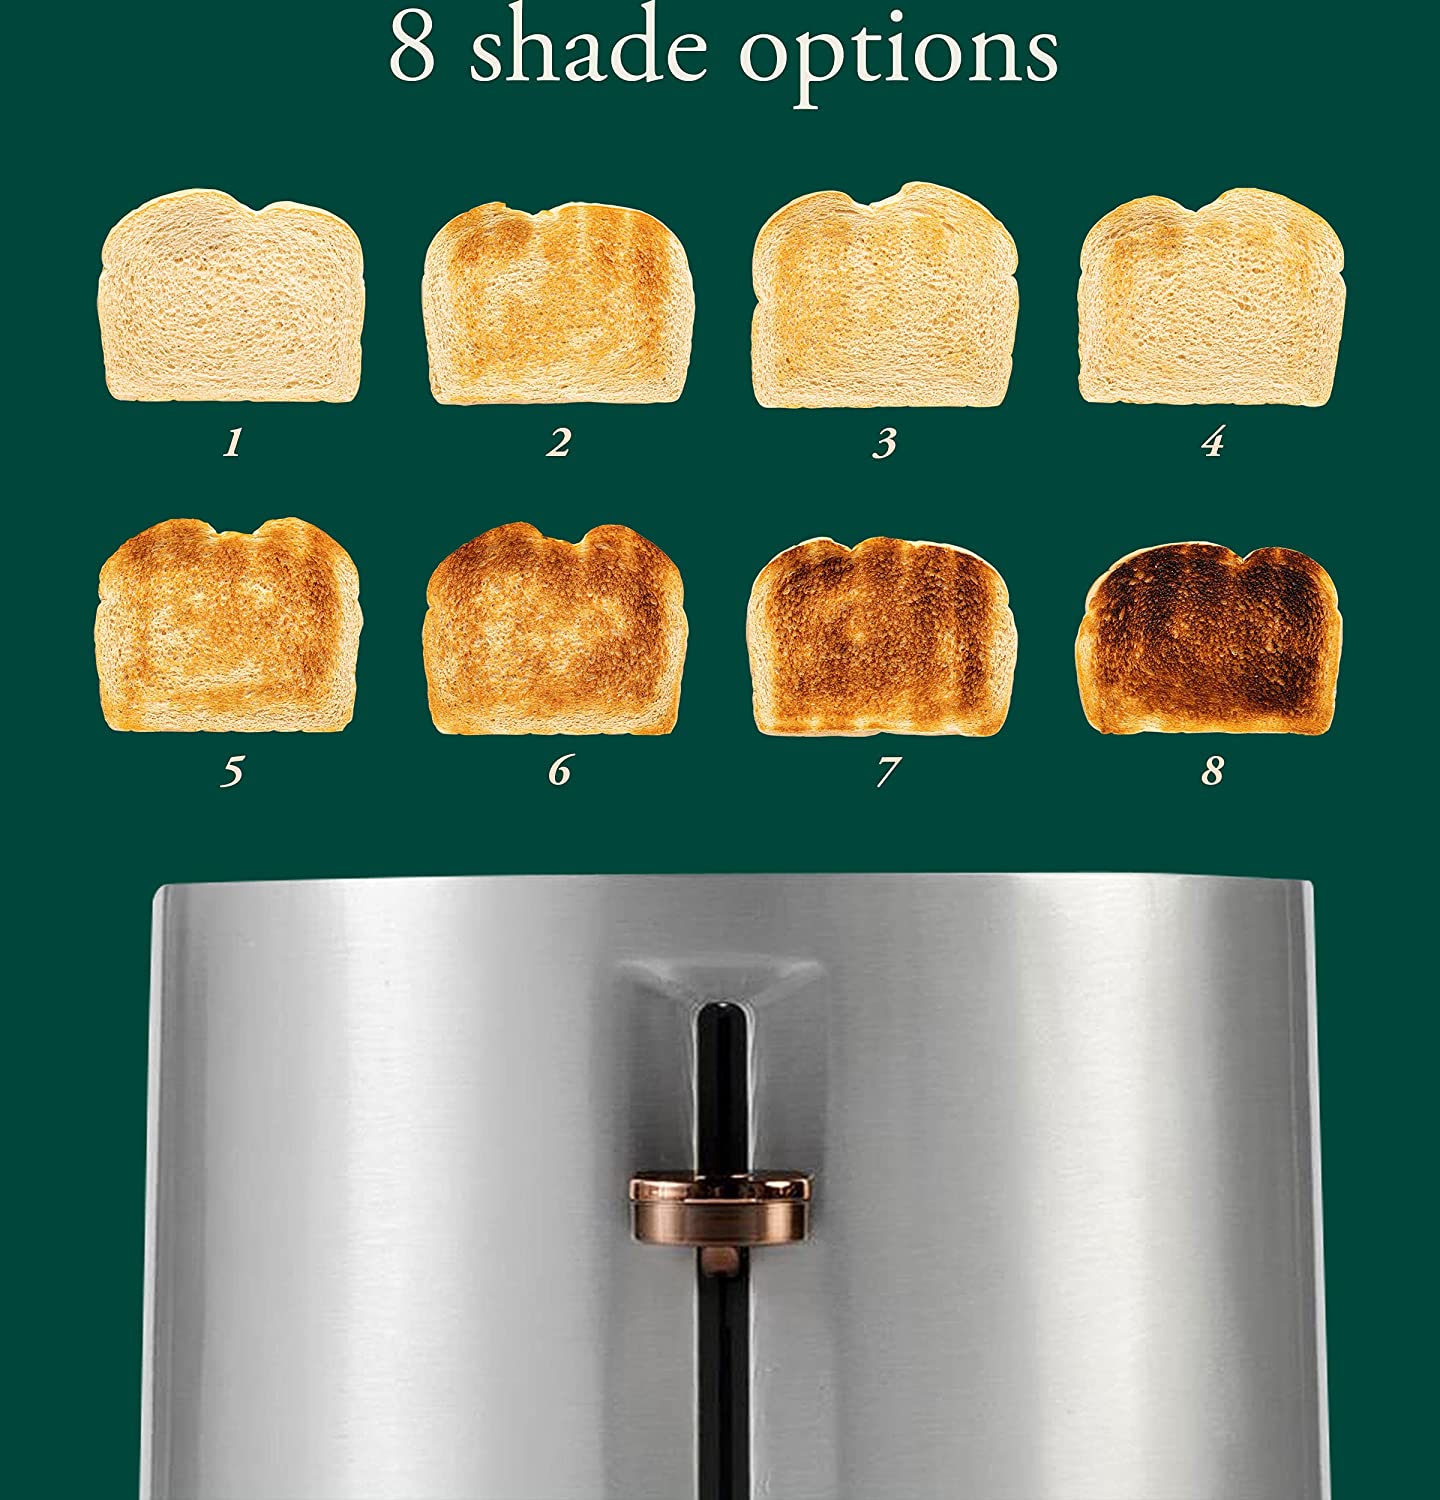 Café Express Finish 2-Slice Toaster | Extra-Wide Slots, Extra Lift for Waffles, Pastries, Texas Toast & More | 4 Pre-Set Functions, 8 Shade Options | Countertop Kitchen Essentials | Matte Black